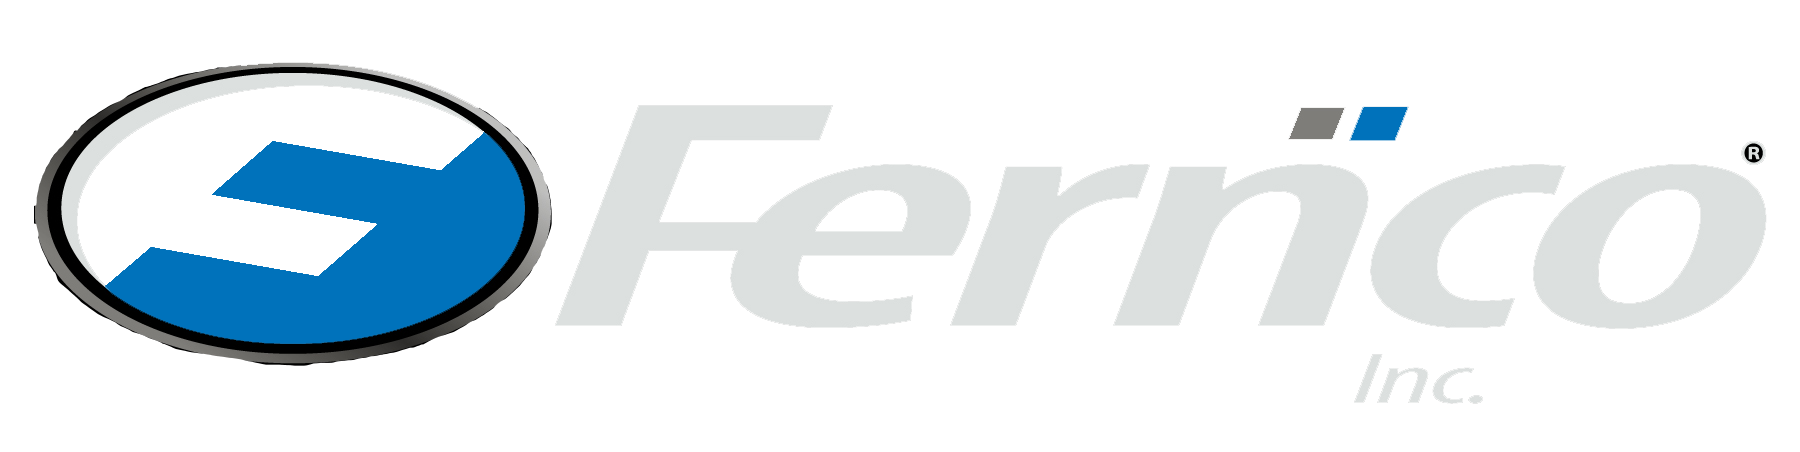 ferncologo.png